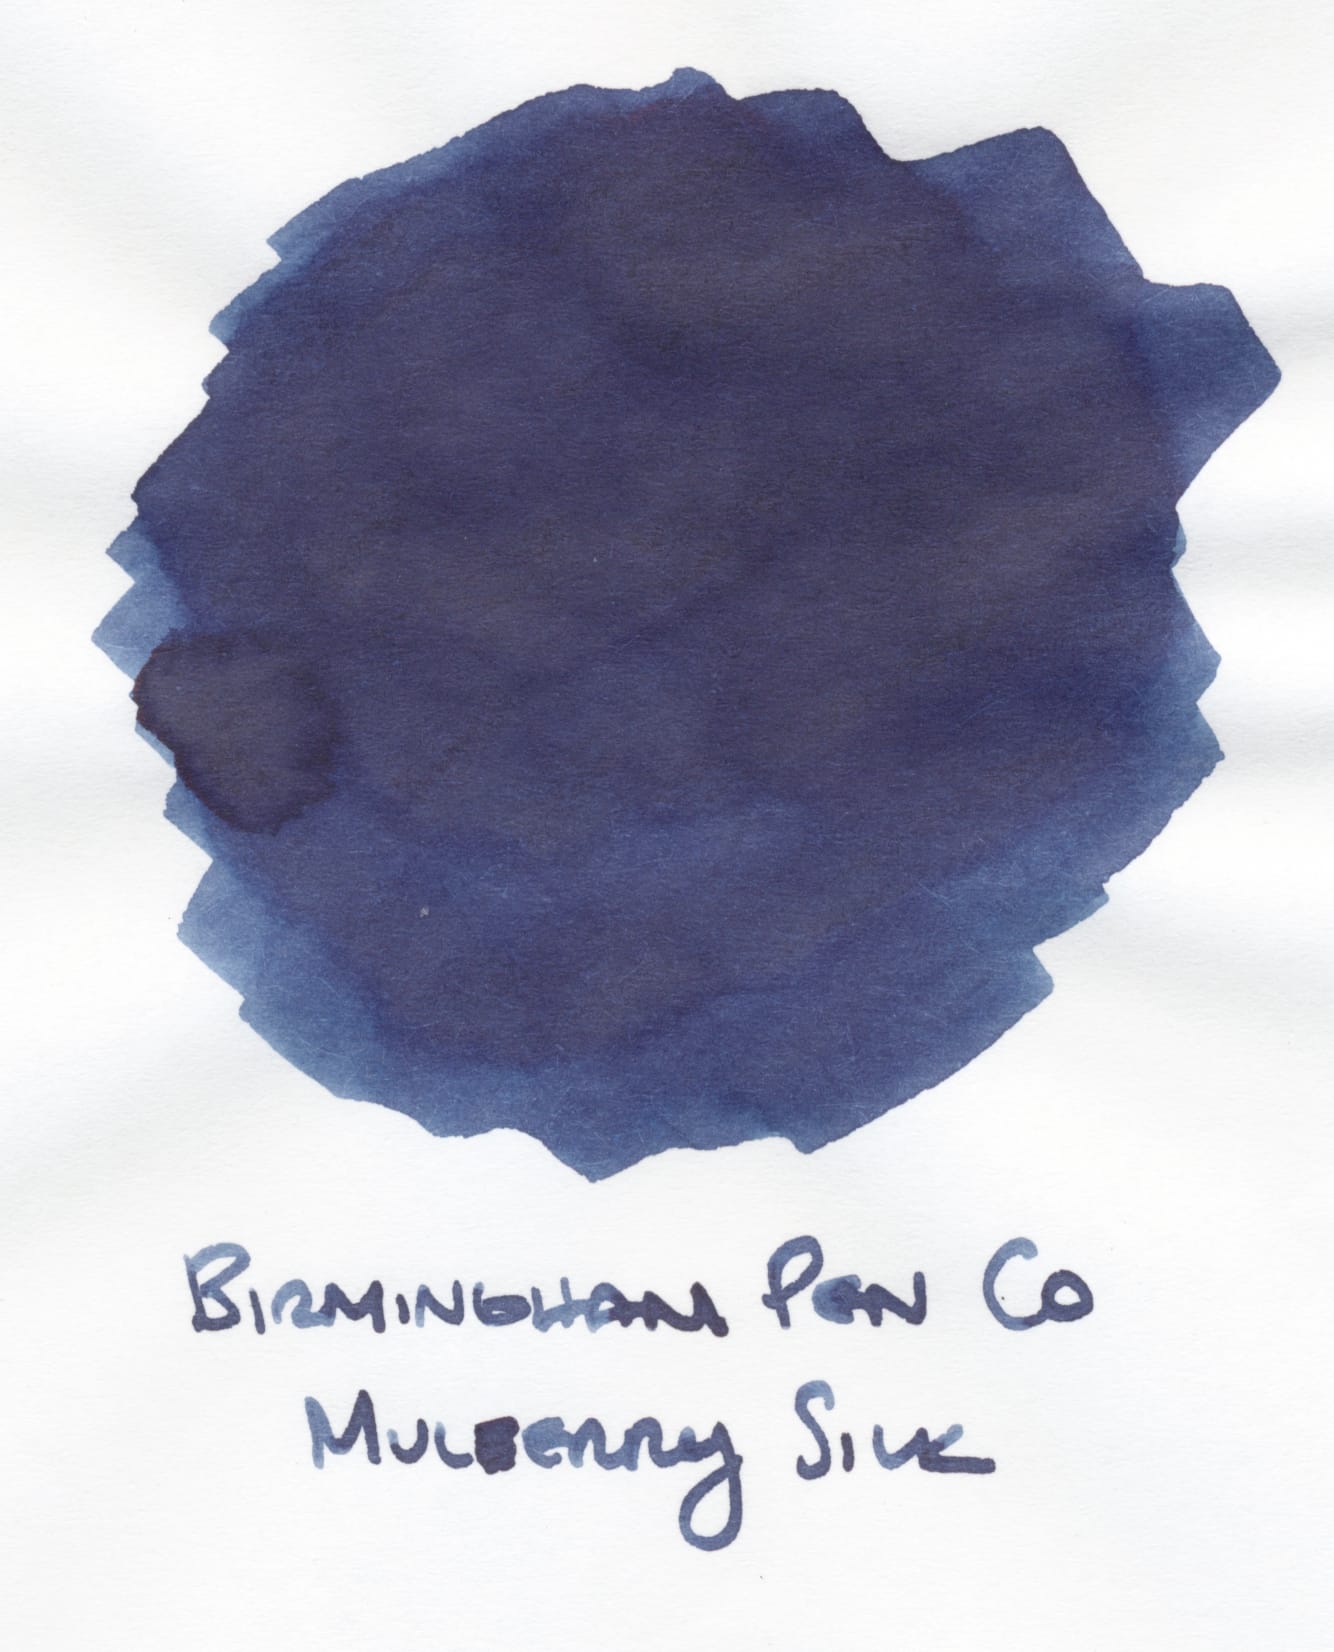 Scan of an ink swatch on paper for a blue-black fountain pen ink, Birmingham Pen Co Mulberry Silk